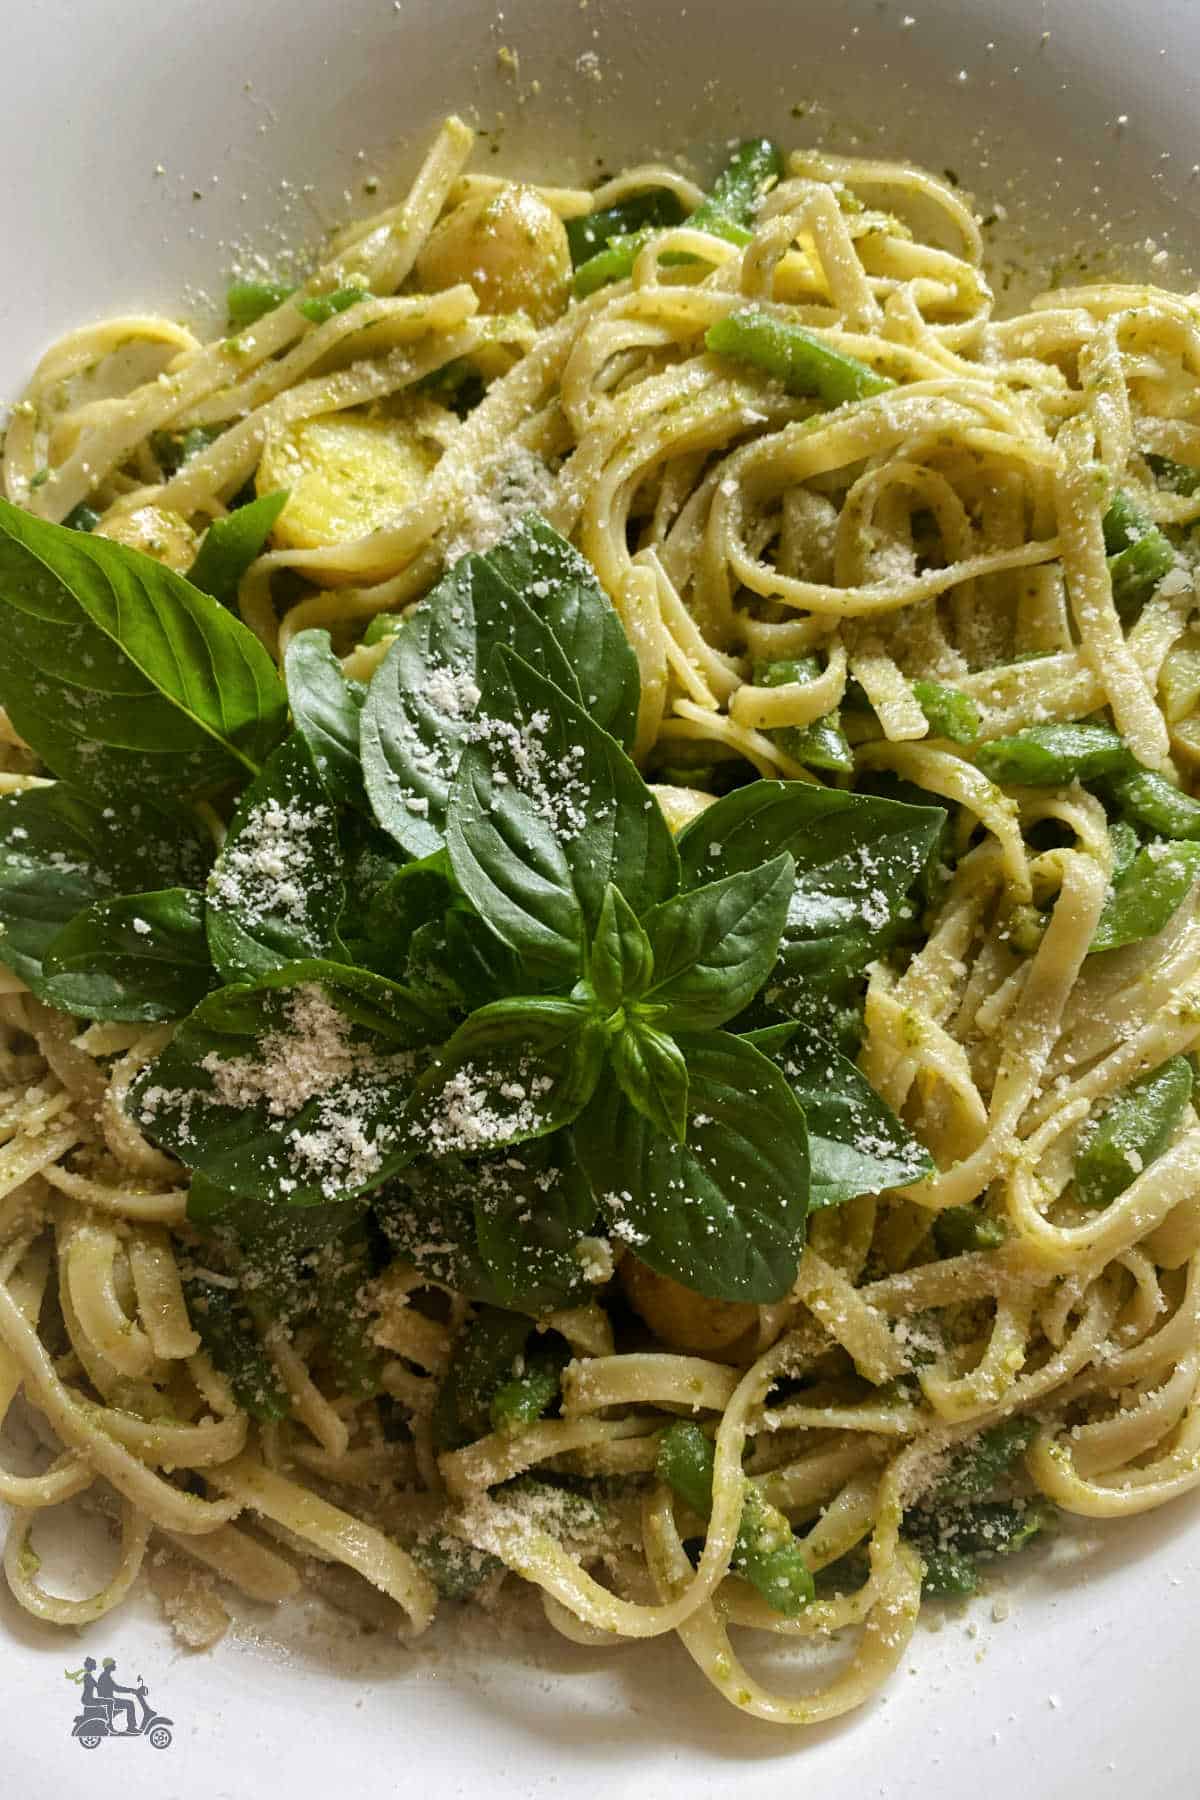 Trenette pasta cooked Ligurian style with green beans and potatoes and a basil pesto sauce. 